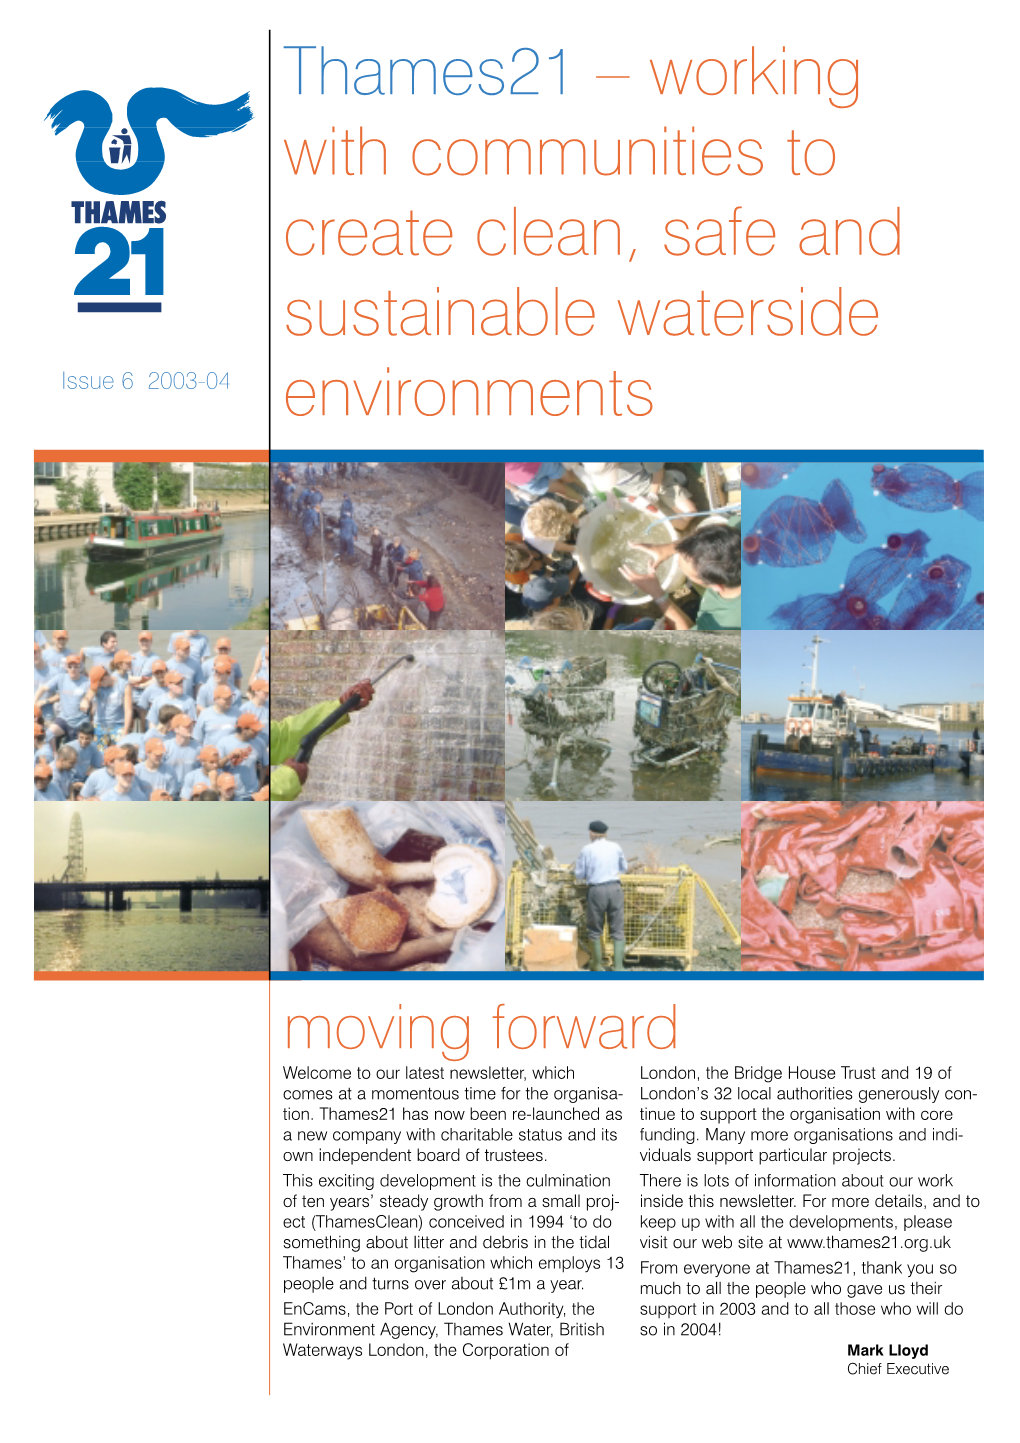 Working with Communities to Create Clean, Safe and Sustainable Waterside Issue 6 2003-04 Environments